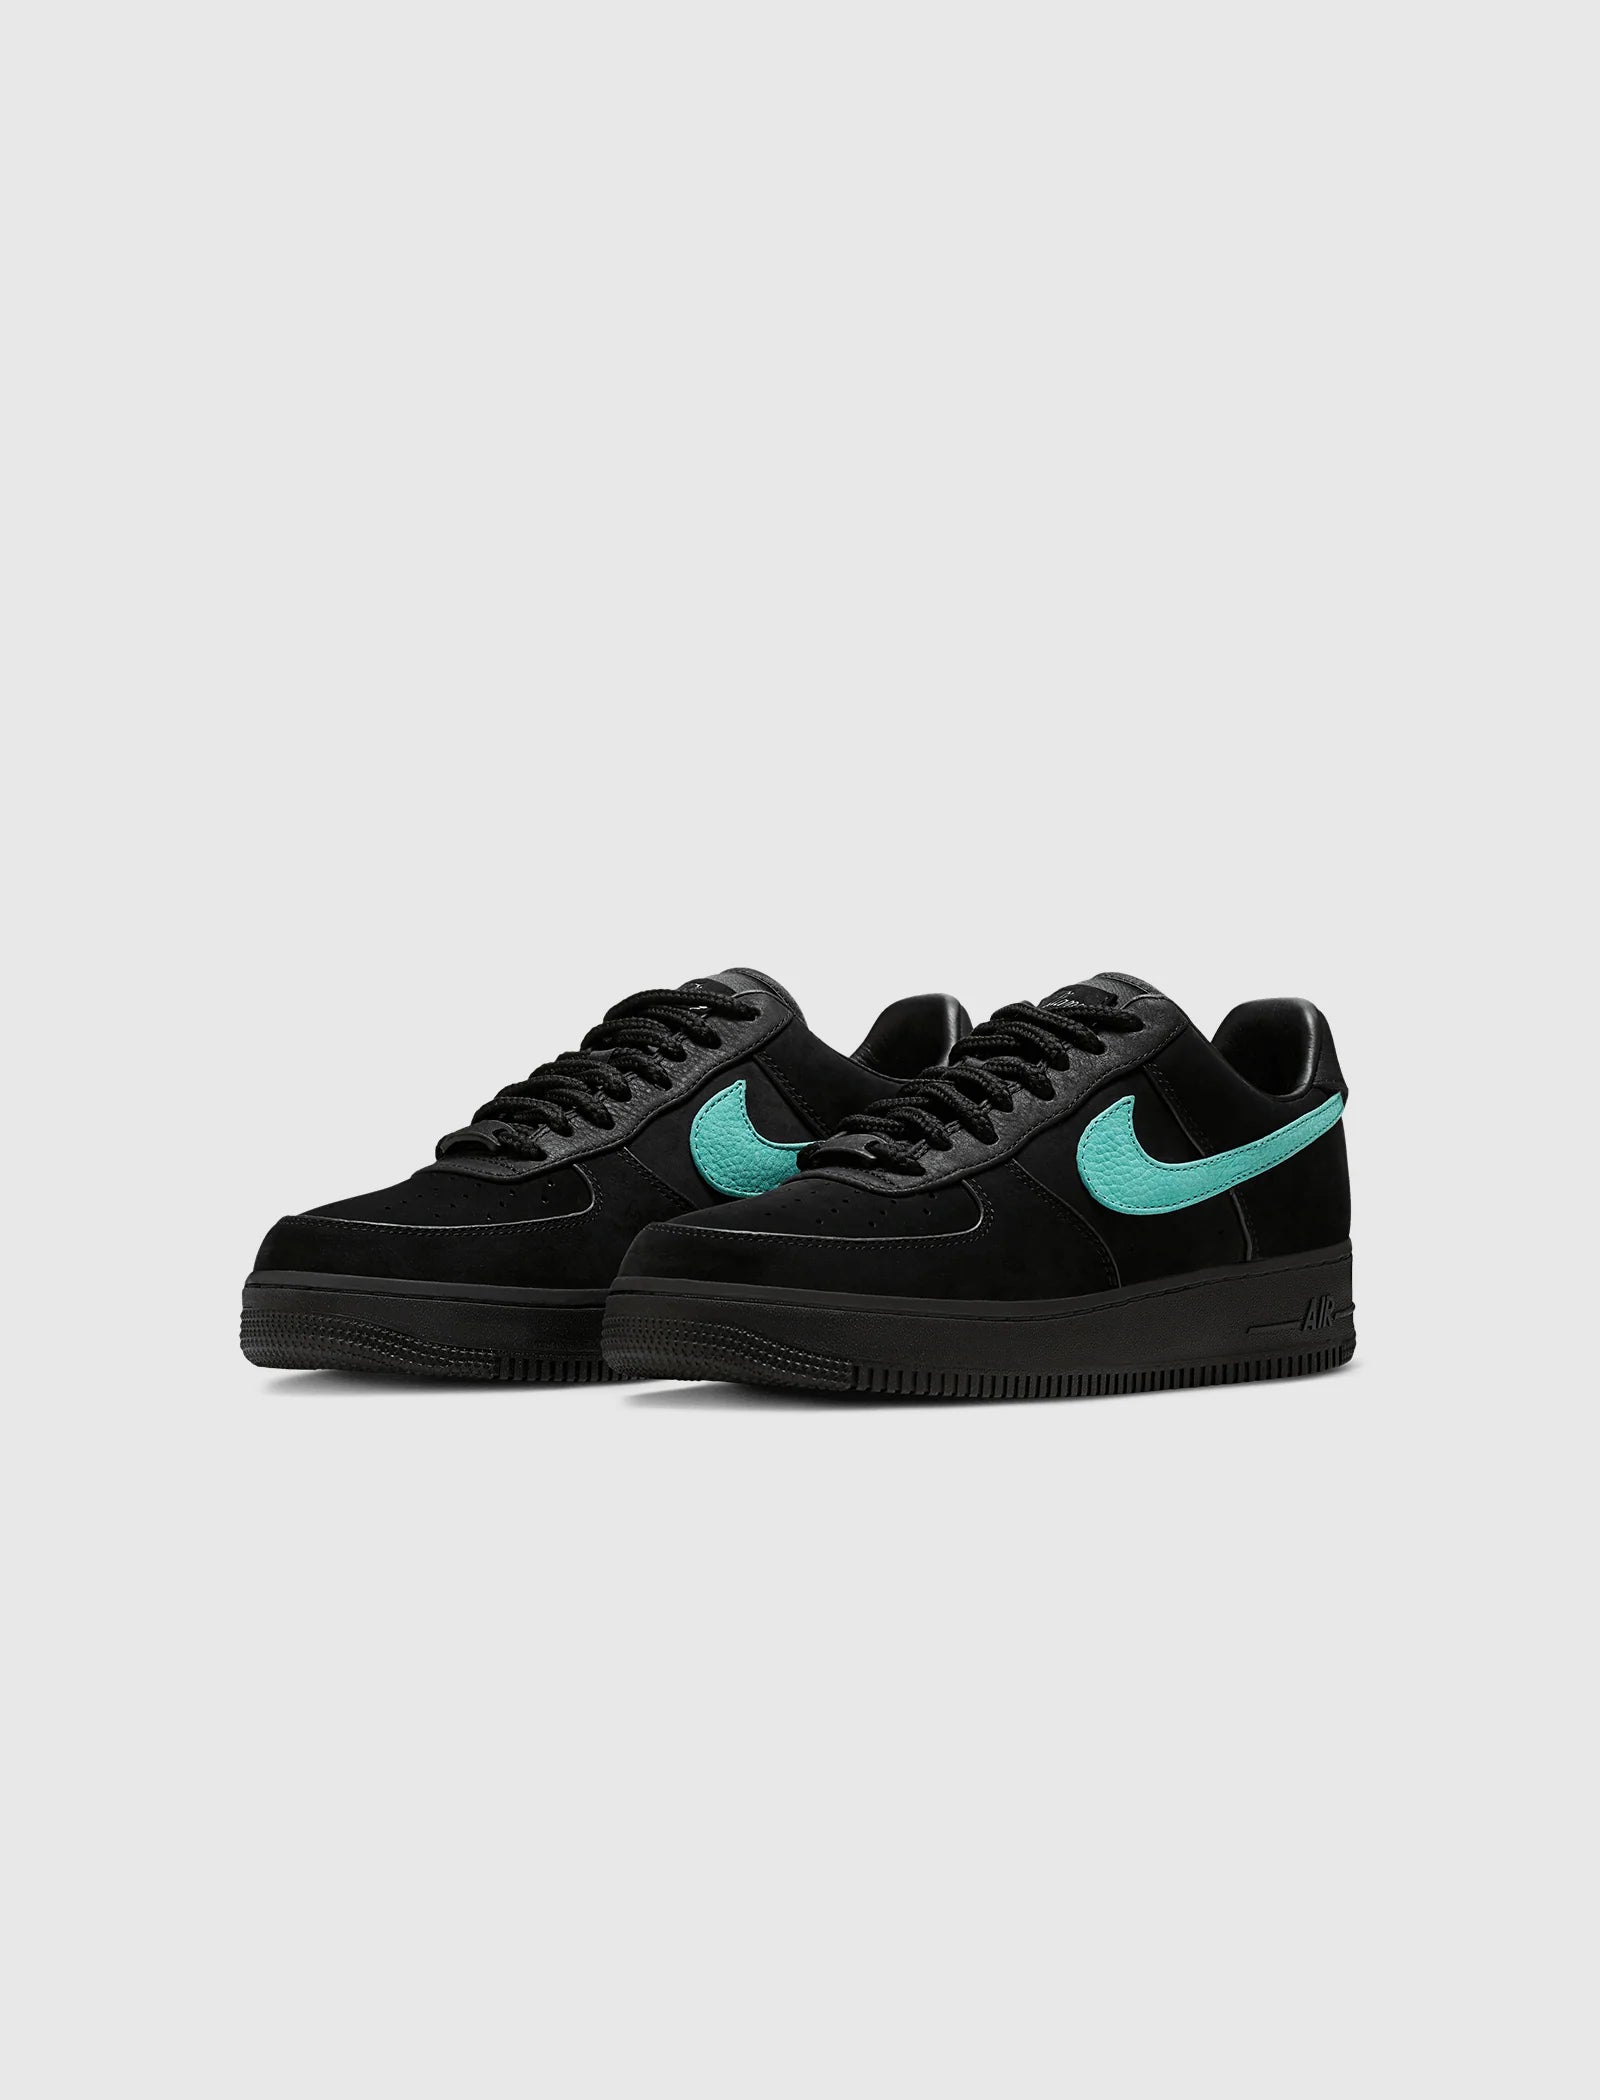 TIFFANY & CO. AIR FORCE 1 LOW "1837"